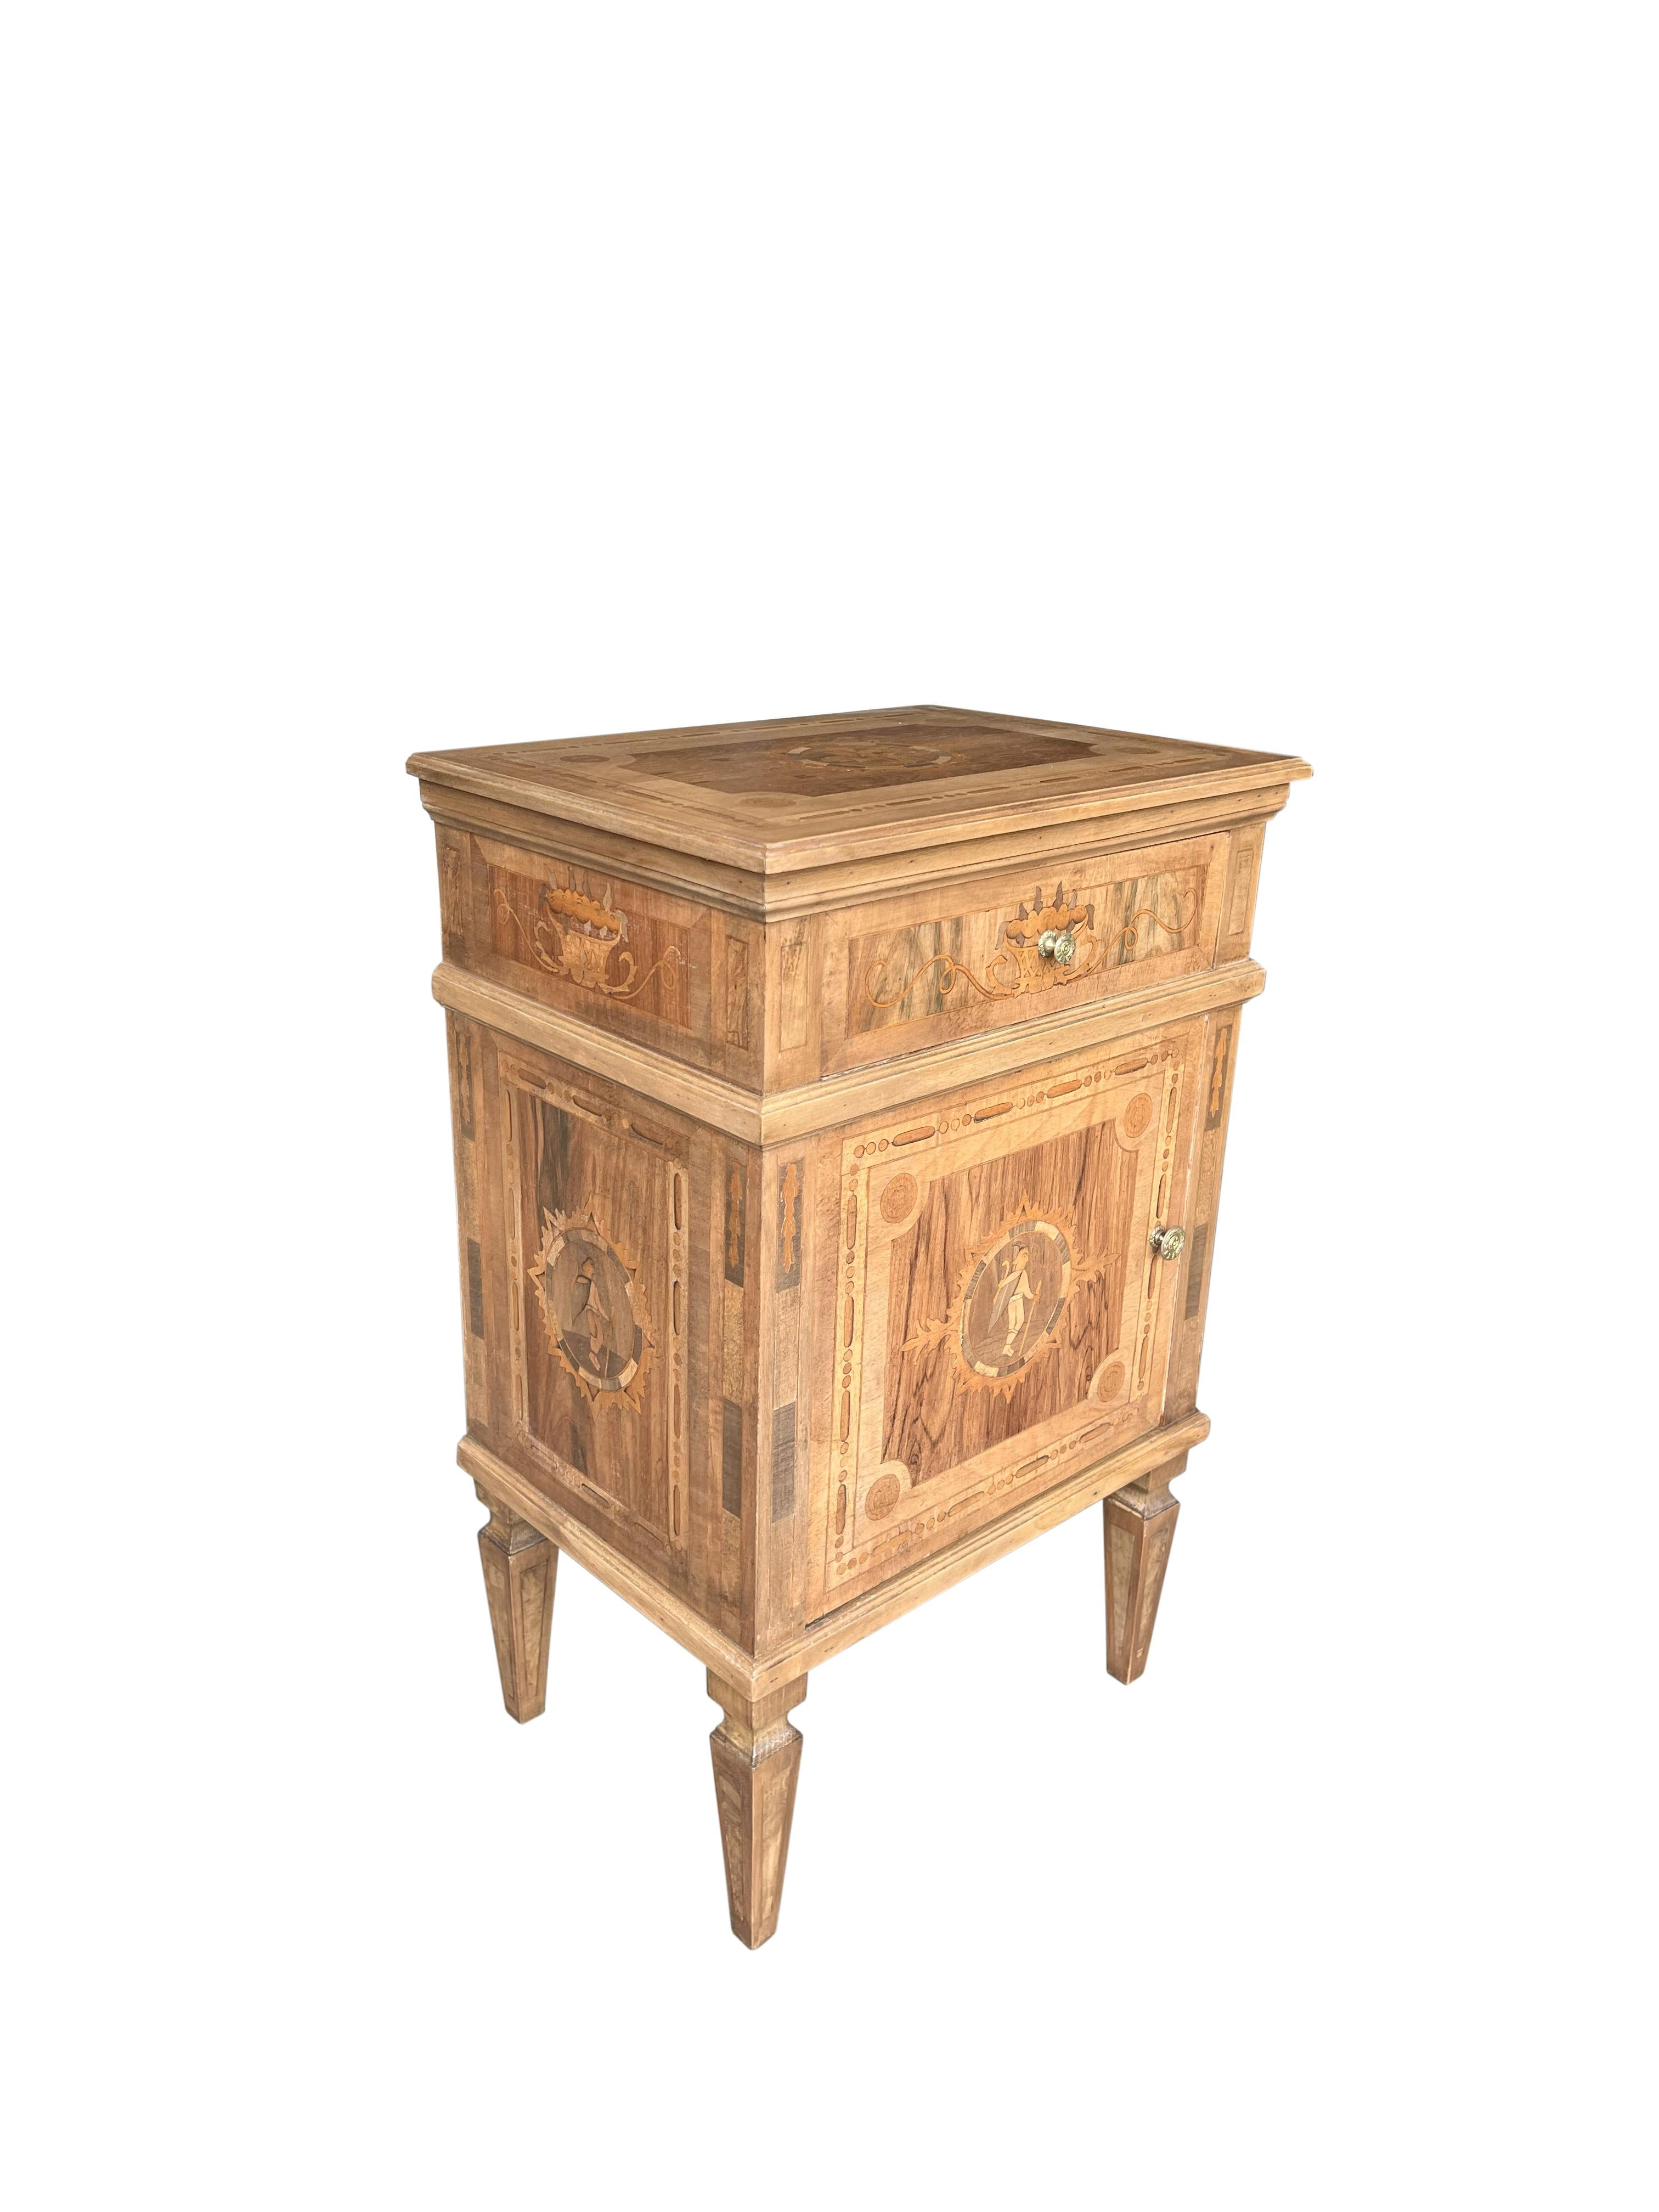 19th Century Louis XVI Style Tuscan Italian Walnut Nightstand Pair with Inlay Marquetry   For Sale